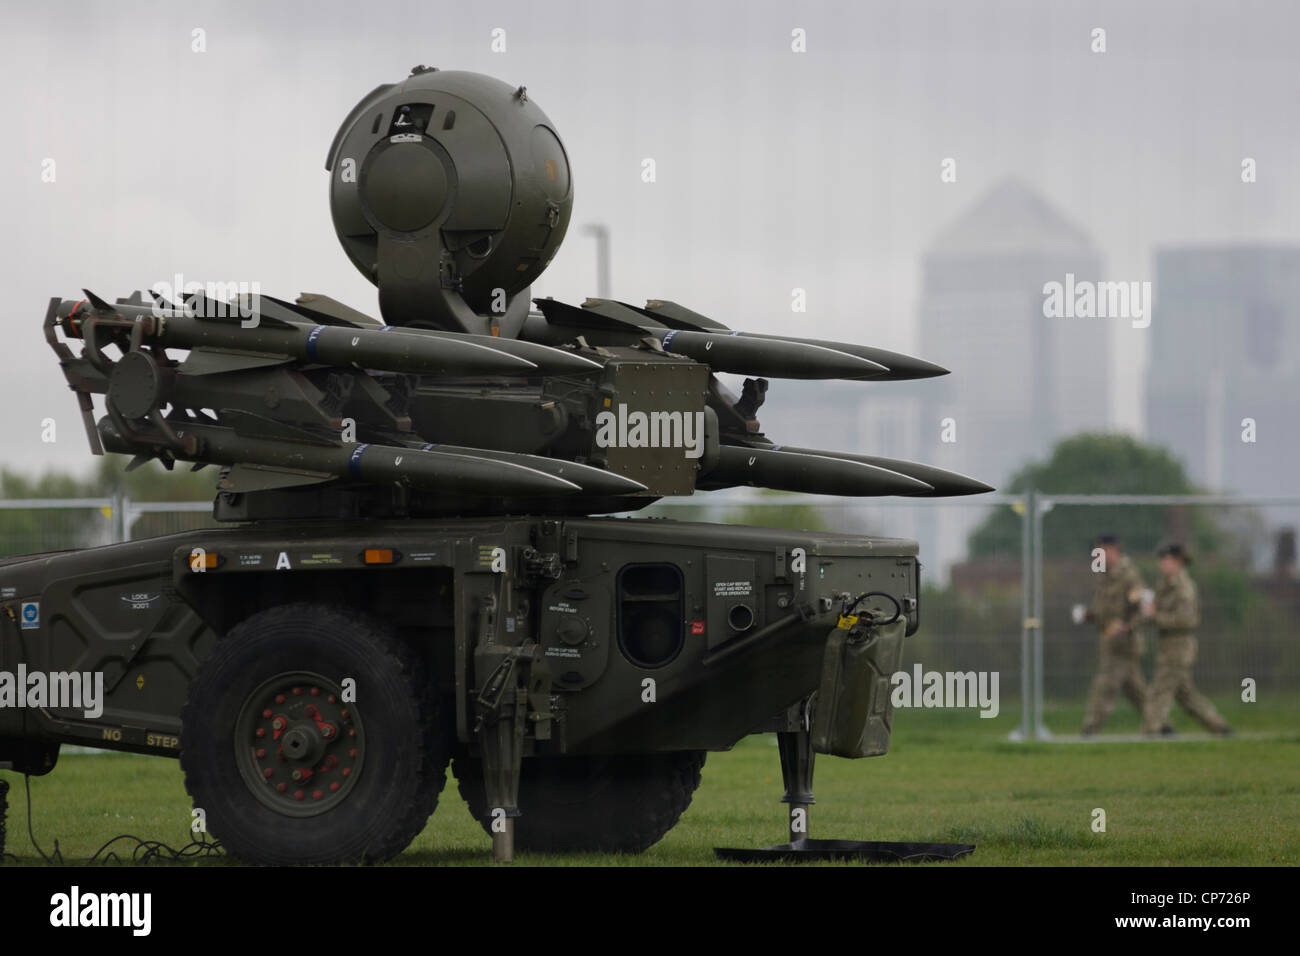 Rapier surface-to-air missiles stationed on Blackheath, a security measure in readiness for the London 2012 Olympic games. The exercise named Olympic Guardian, began earlier this week in Weymouth, England and in the airspace over the capital. Stock Photo